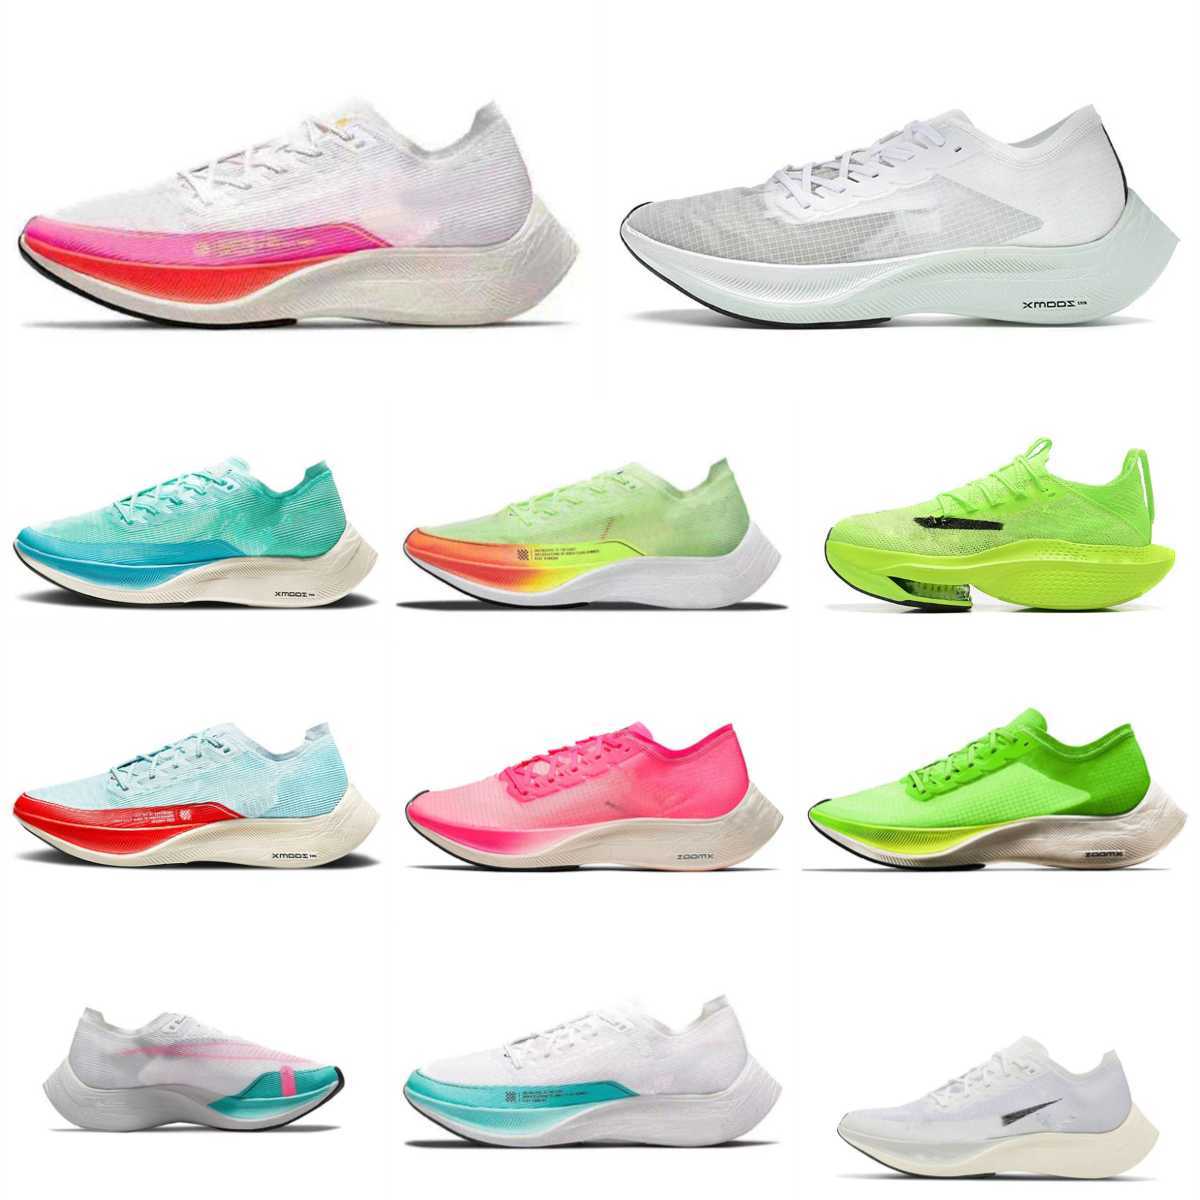 

Trainers Air Zoomx Vaporfly Next% 2 Running Shoes Mens Womens 3 Tempo Fly Knit Hyper Rainbow Violet Flash Crimson Neon Bright Mango Light Weight Max Runners Sneakers, Please contact us